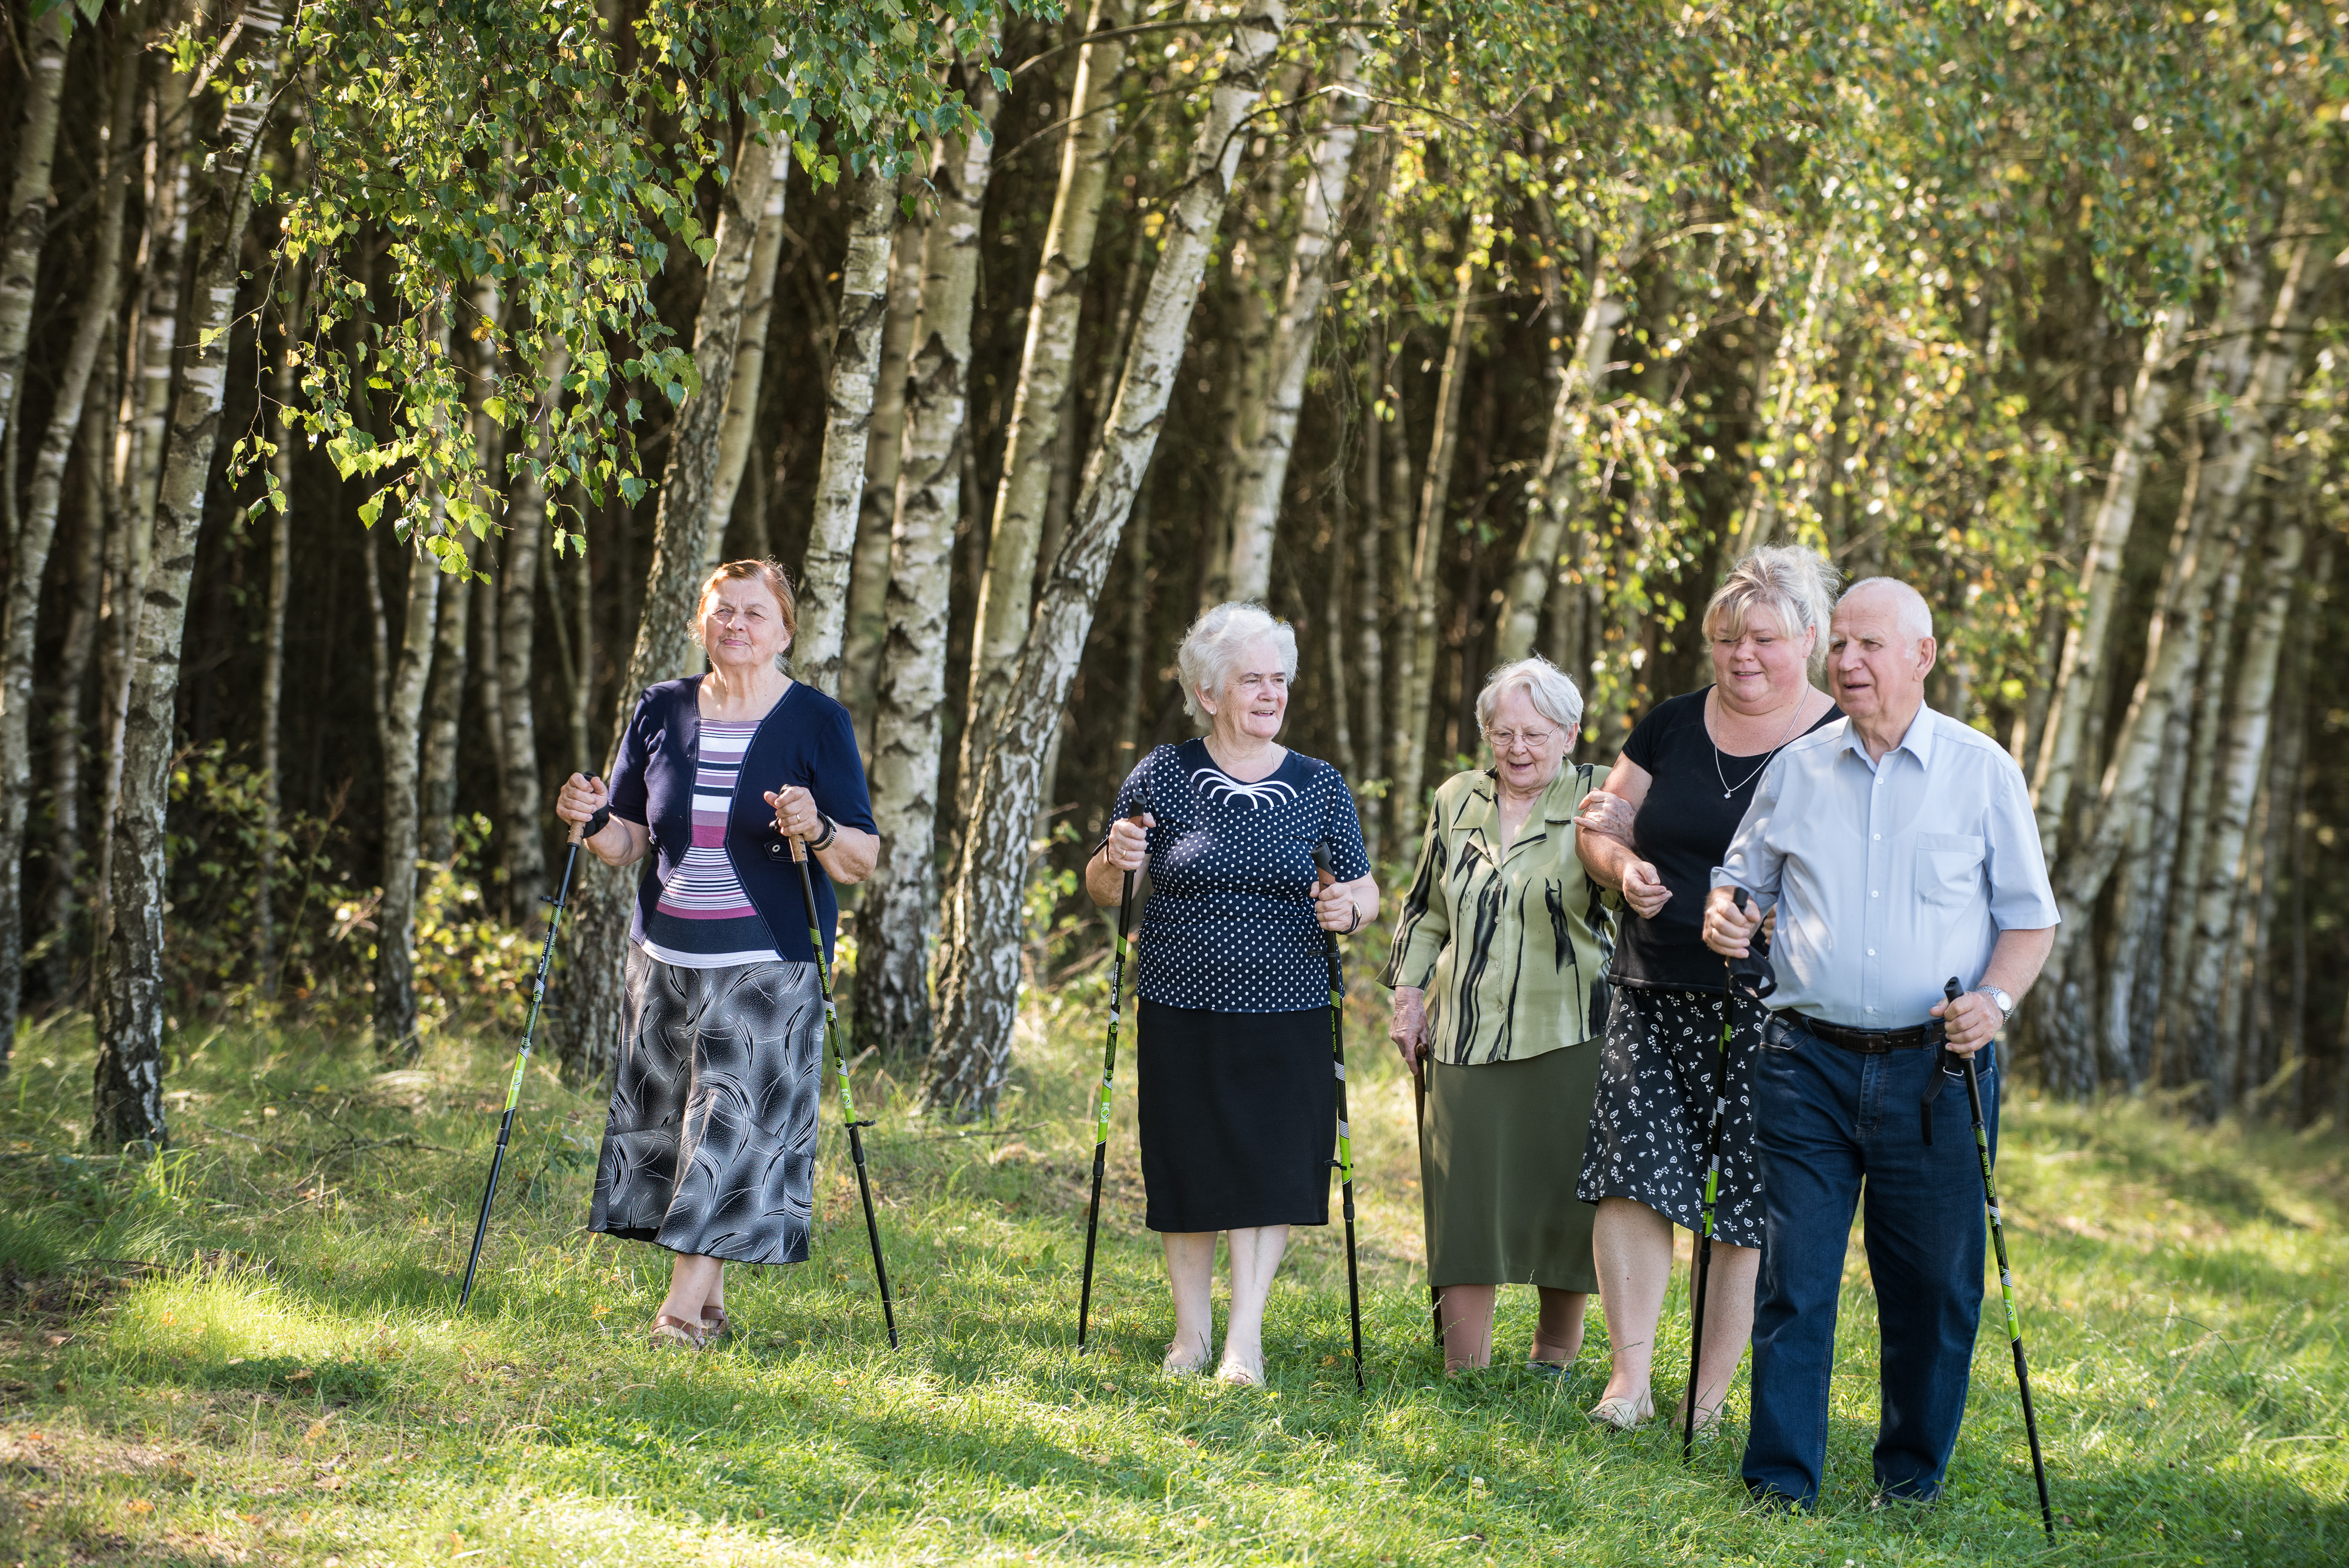 The photo presents a group of seniors walking in a birch forest.